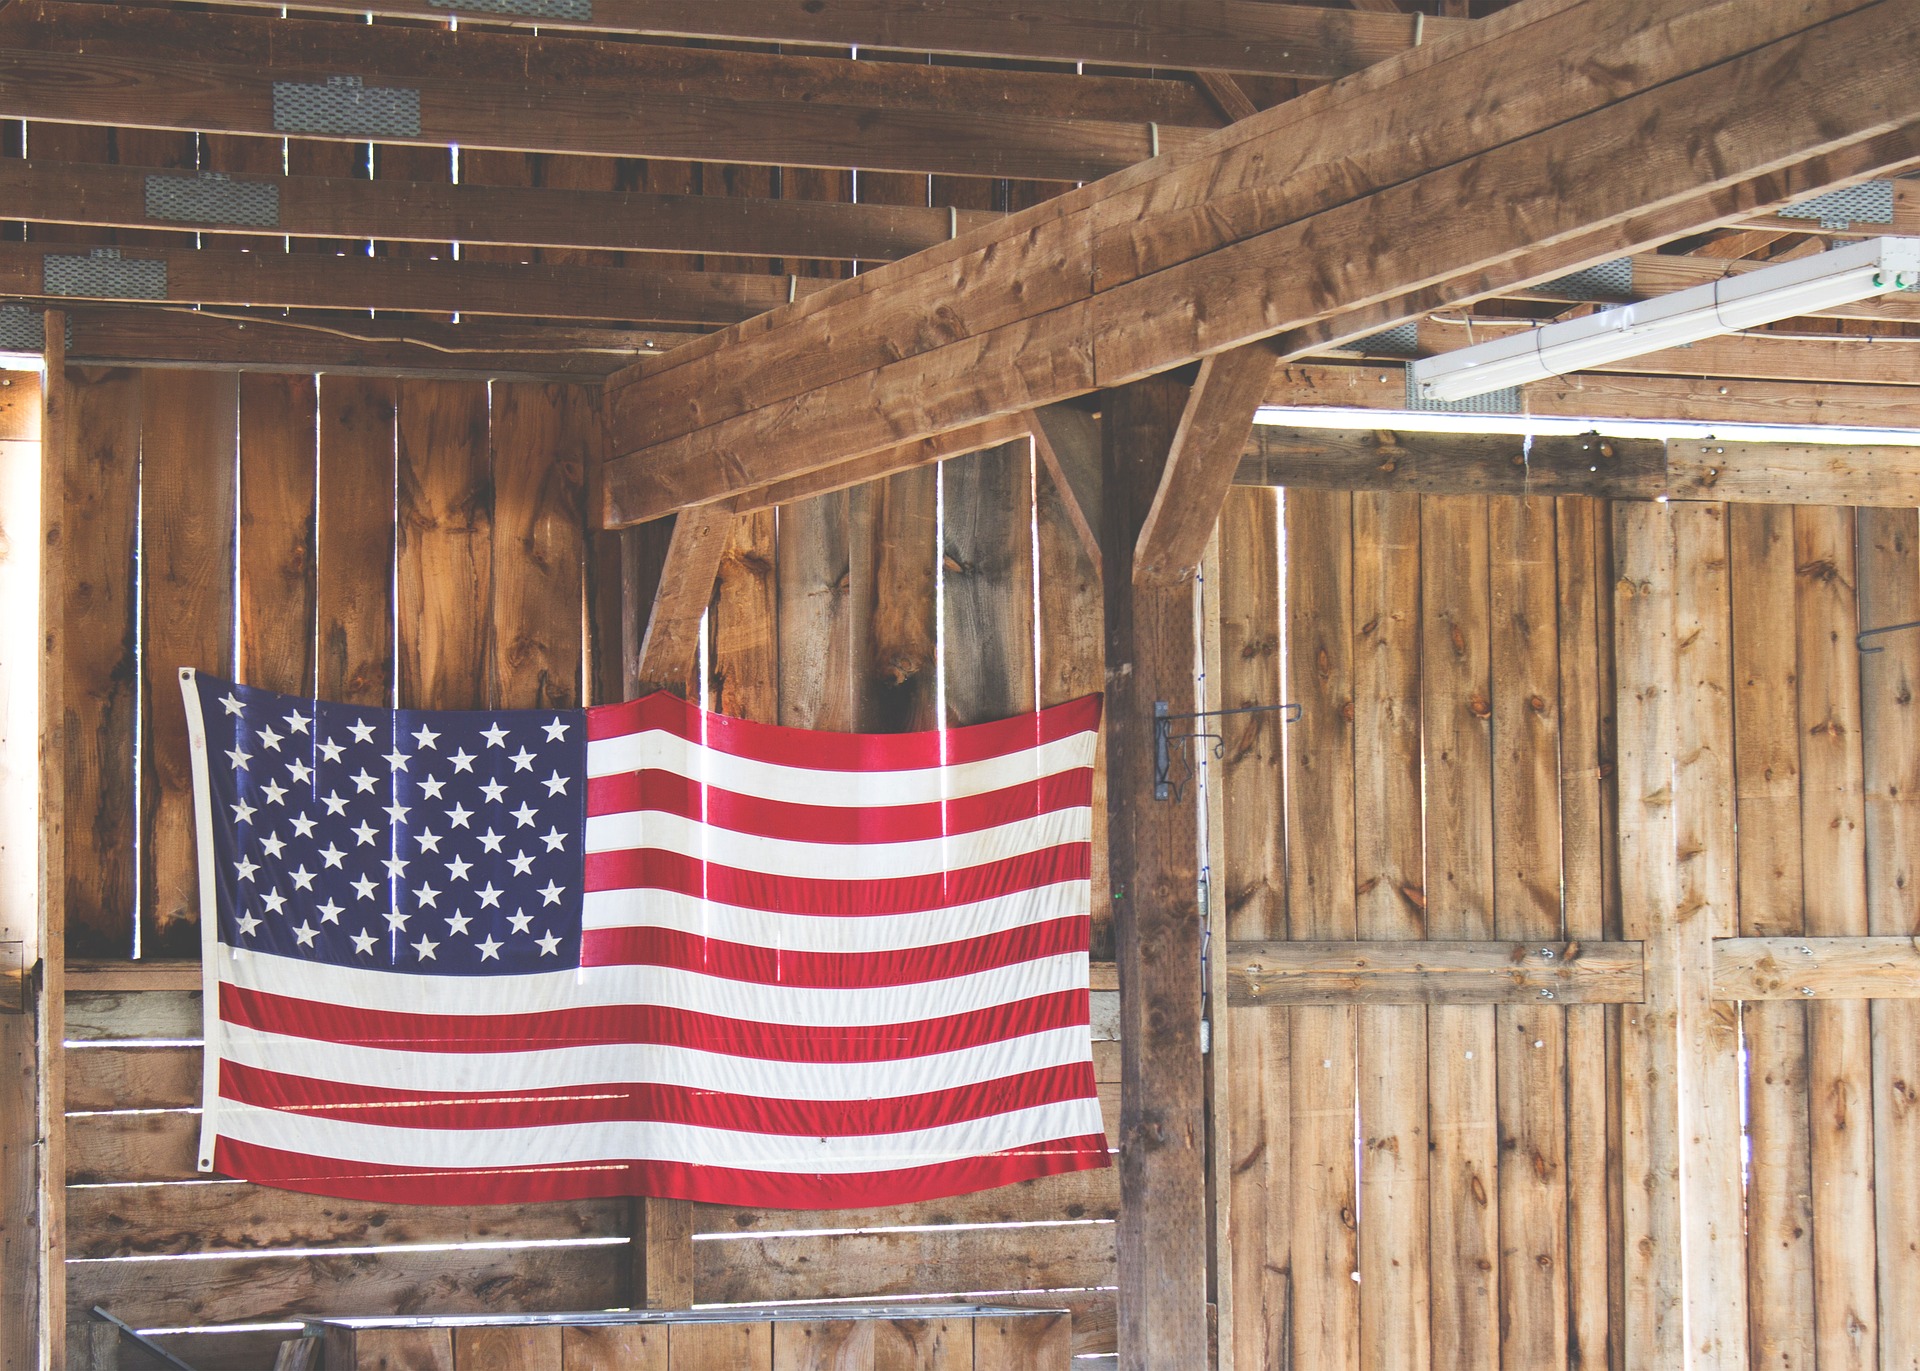 American Flag hanging in a barn